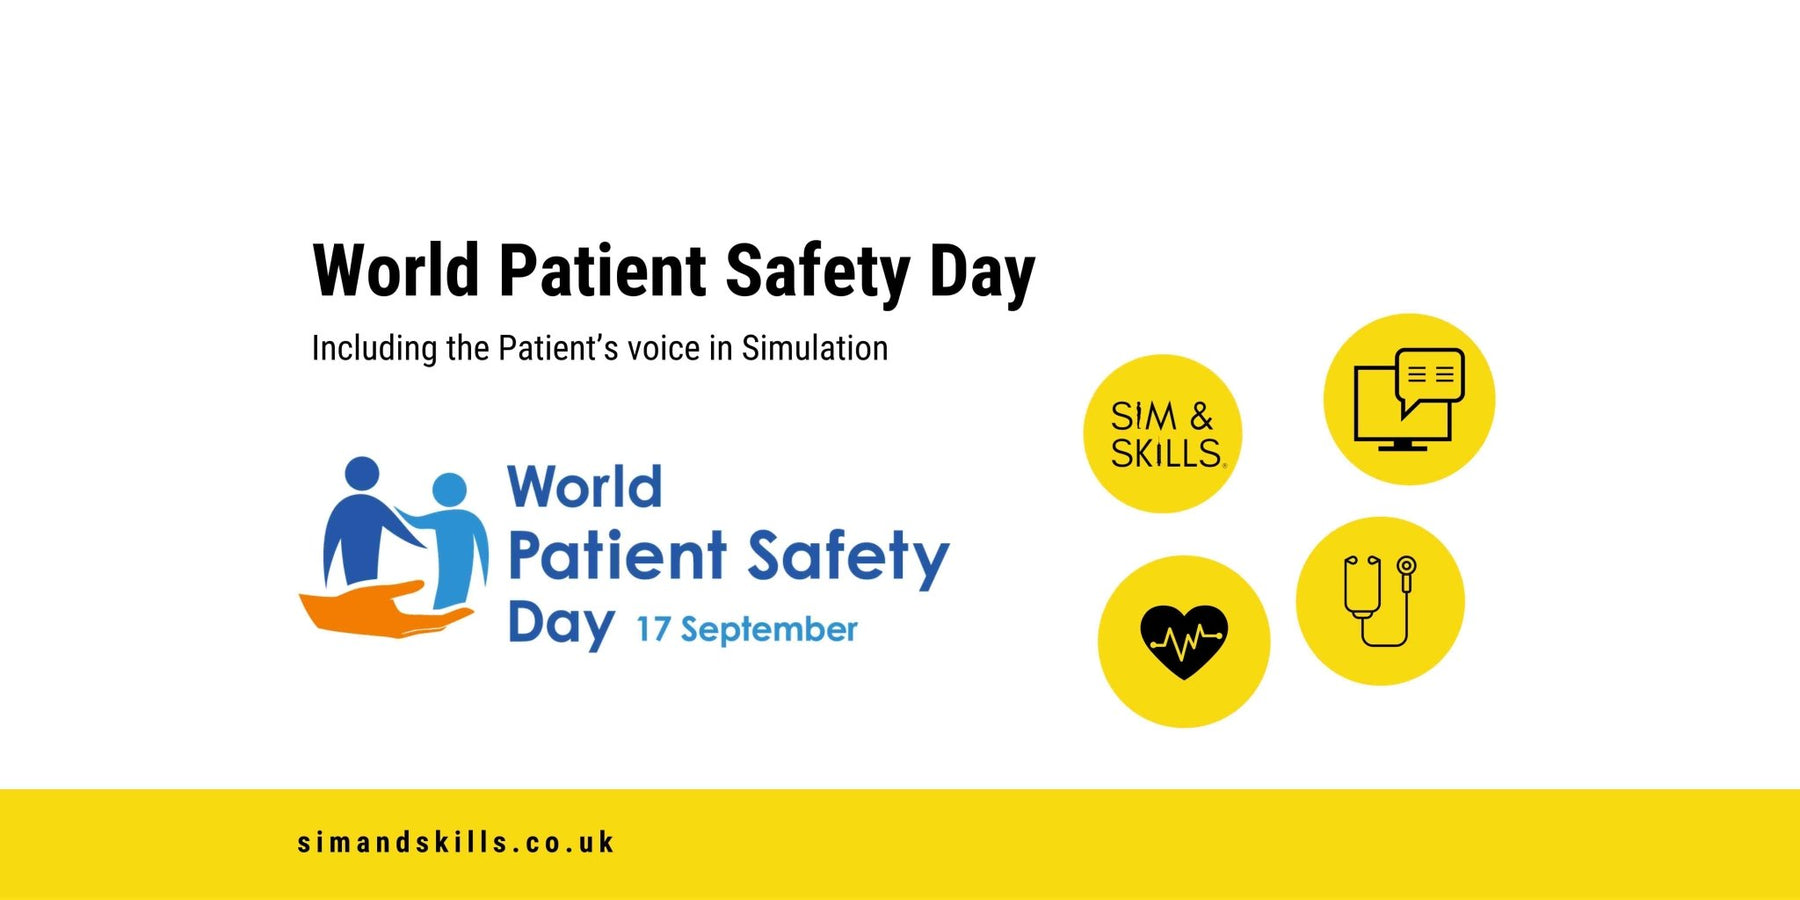 World Patient Safety Day- including the patient's voice in simulation - Sim & Skills